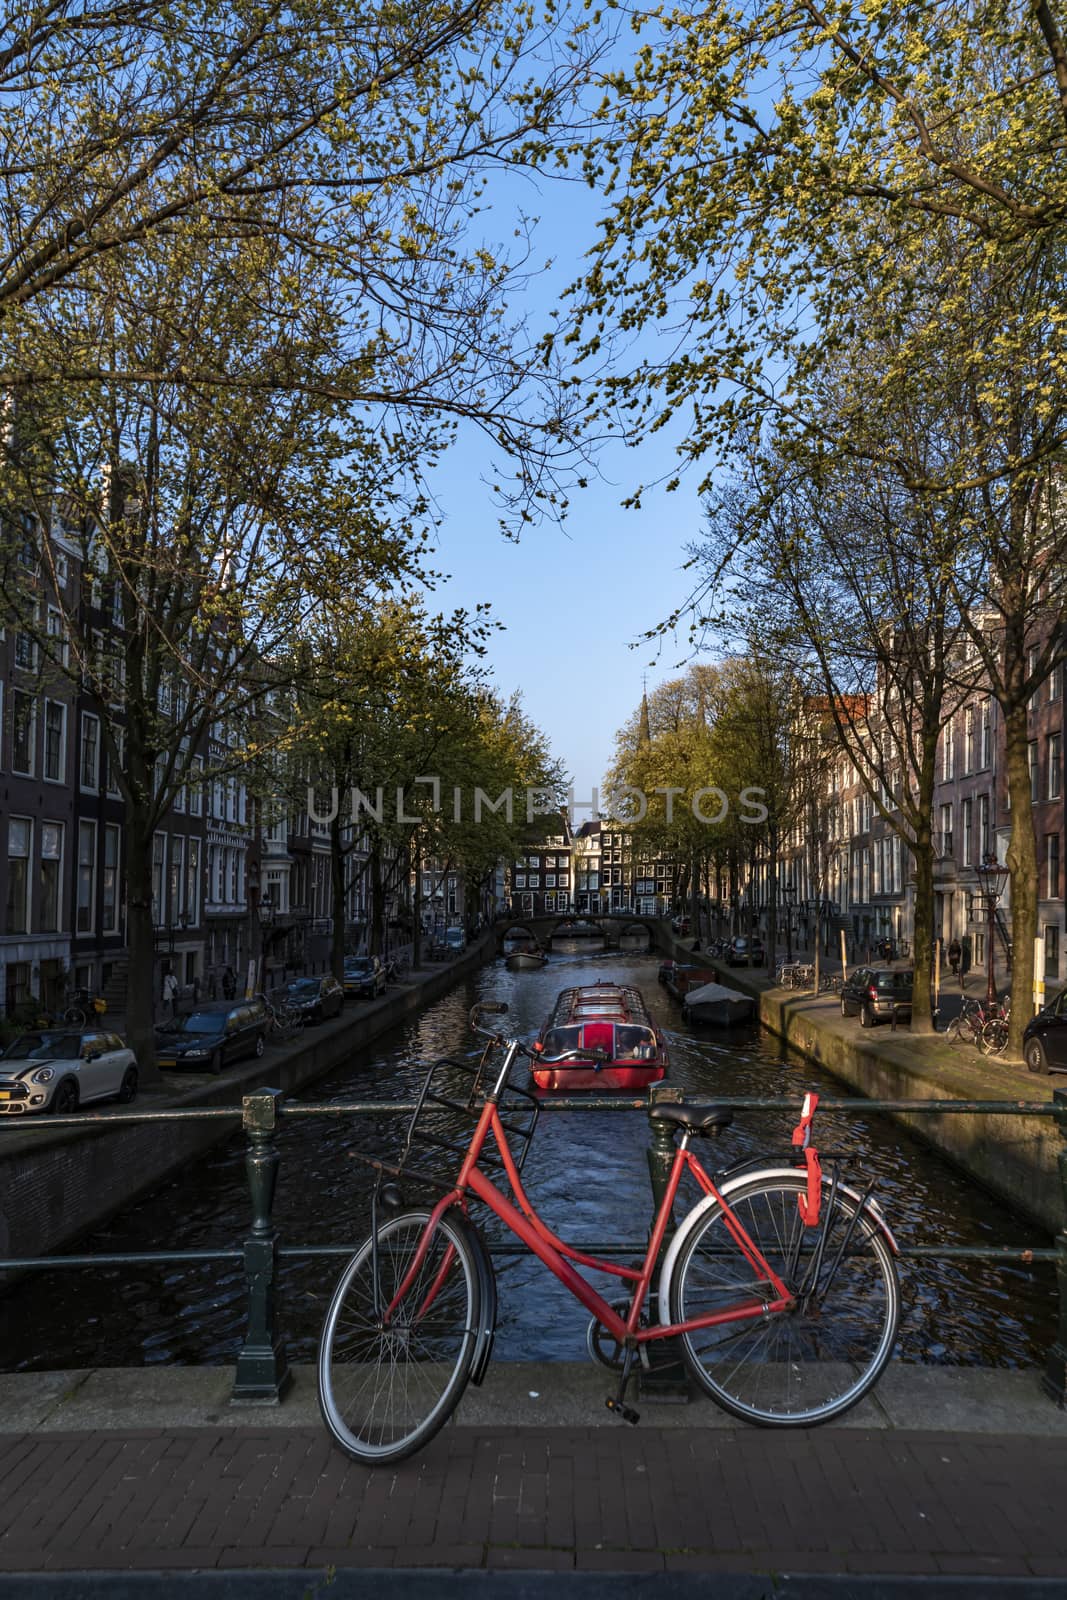 Red bicycle parking on the bridge over the calm water of a canal with a boat giving a round trip to tourists, Amsterdam, Netherlands by ankorlight